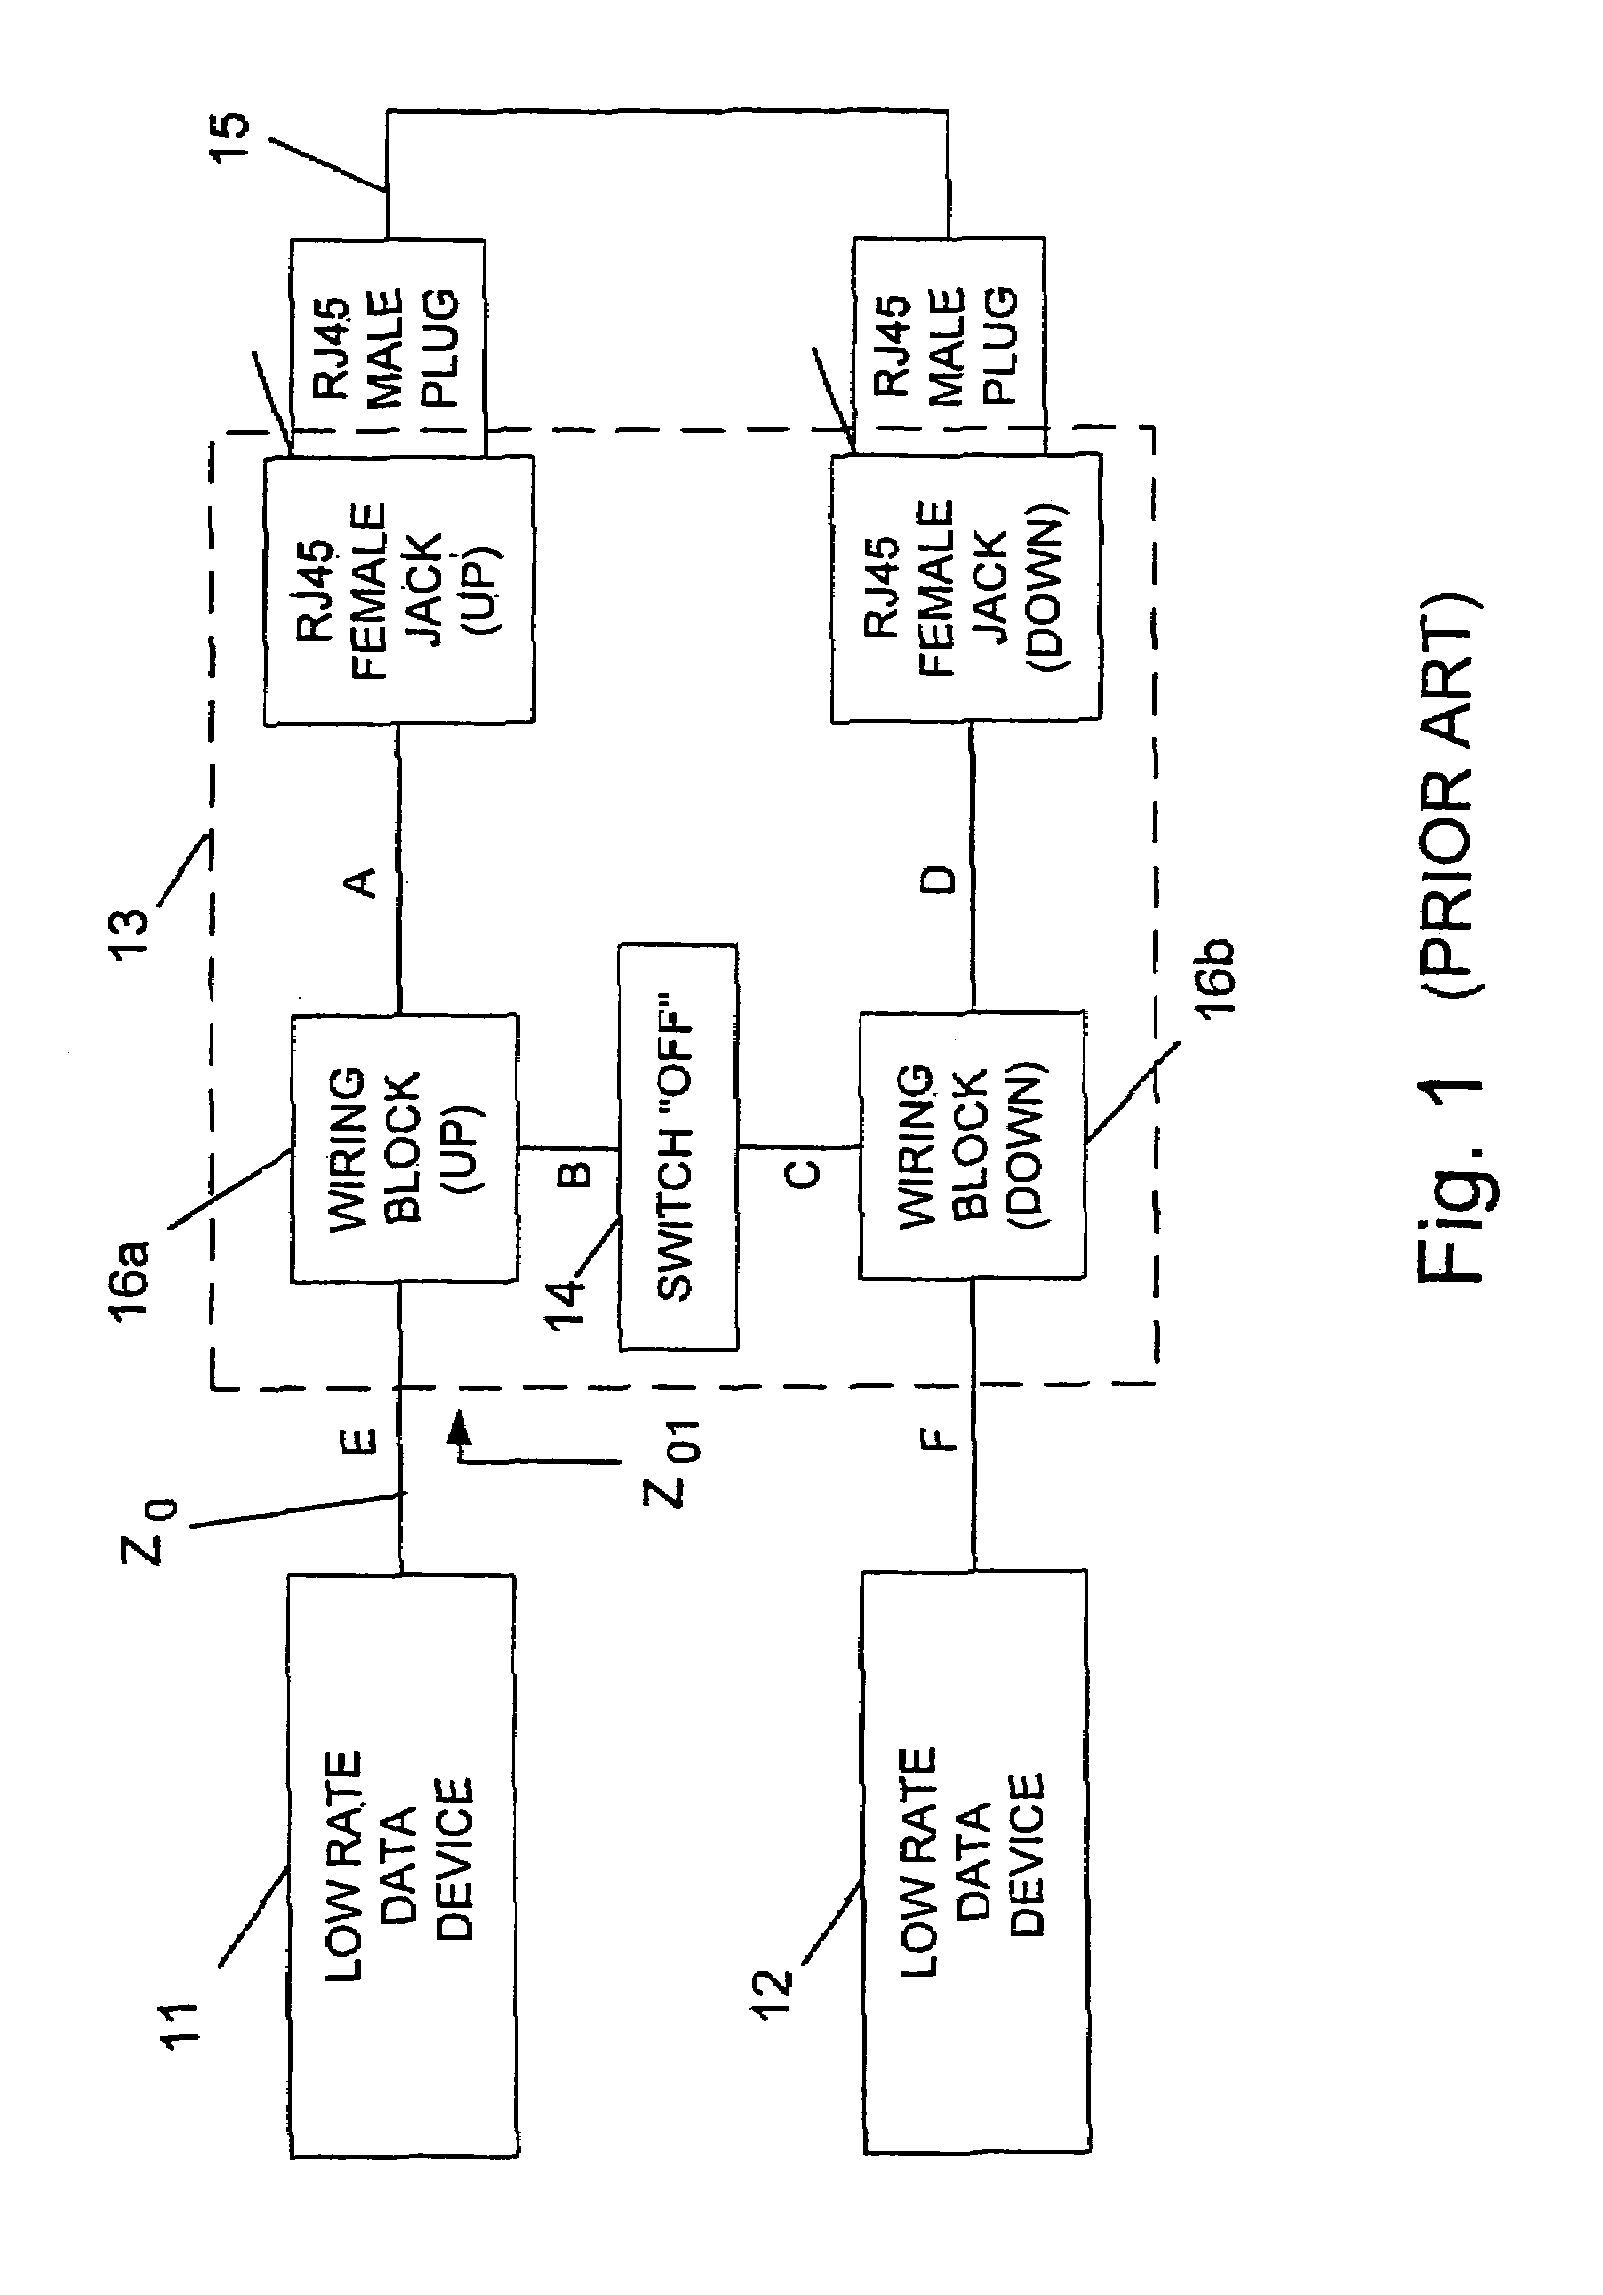 High data rate interconnecting device